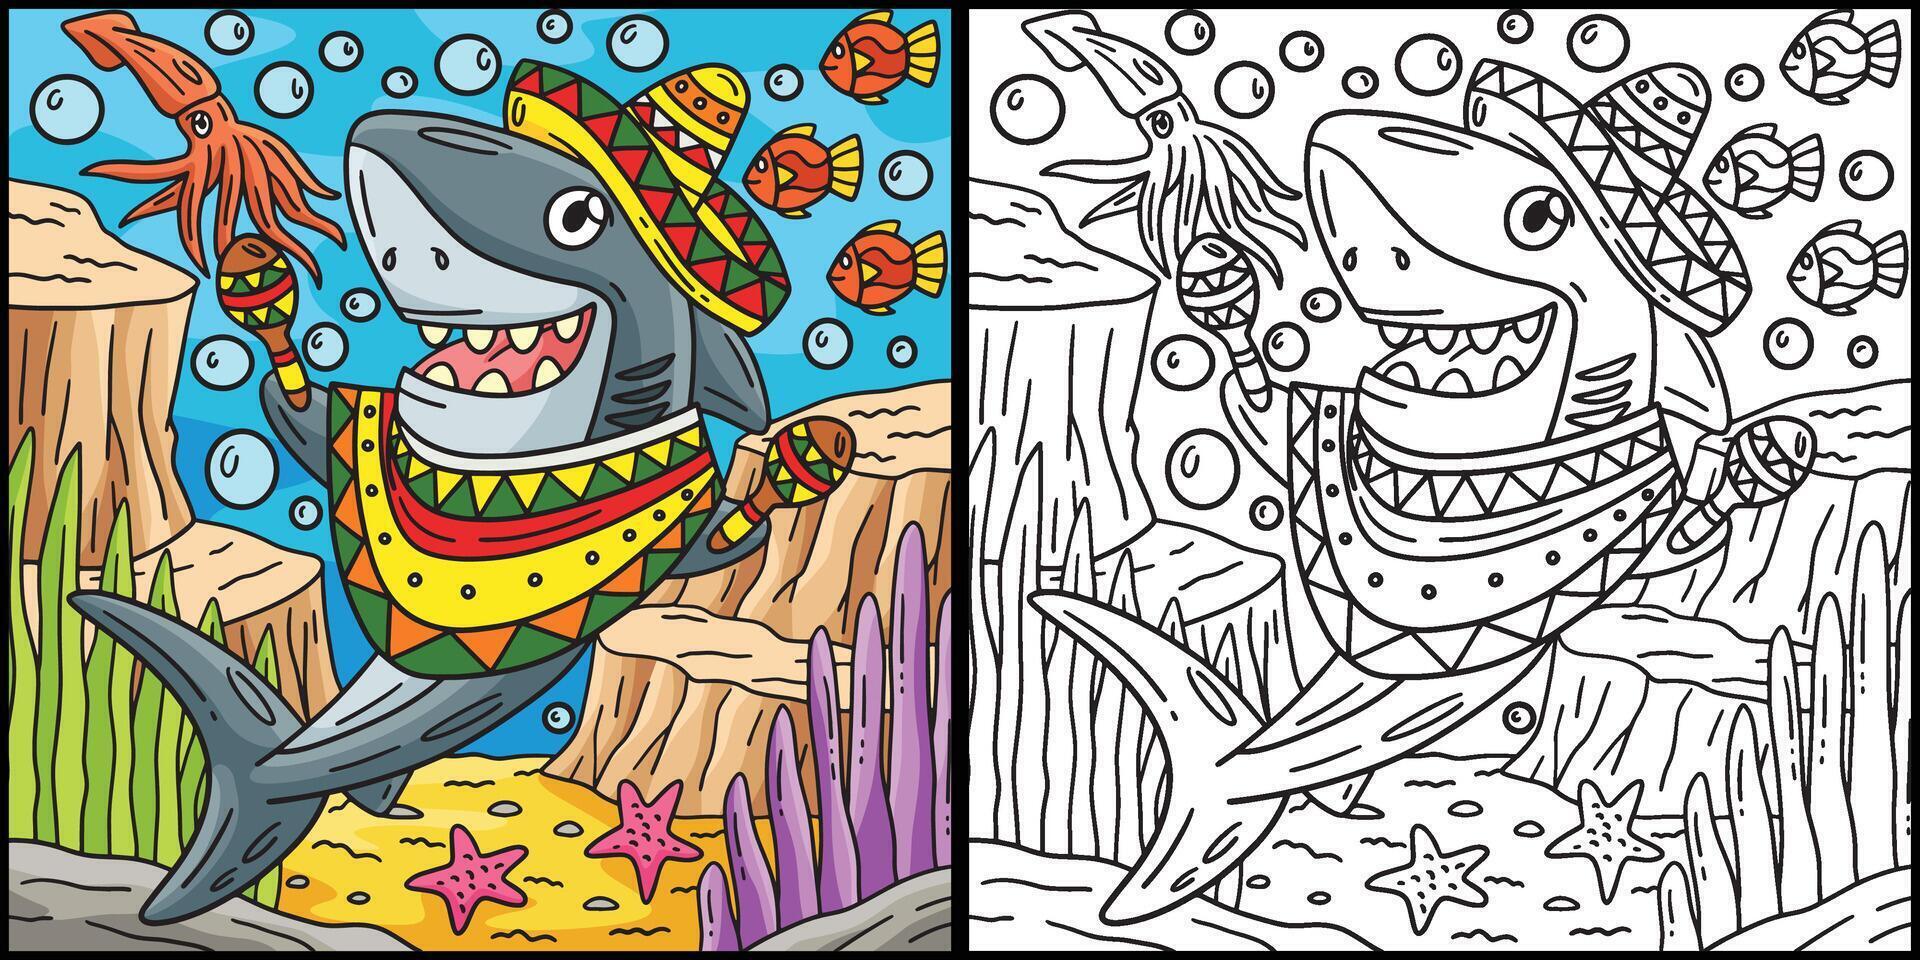 Ice fishing coloring page  Coloring pages, Fish drawings, Ice fishing